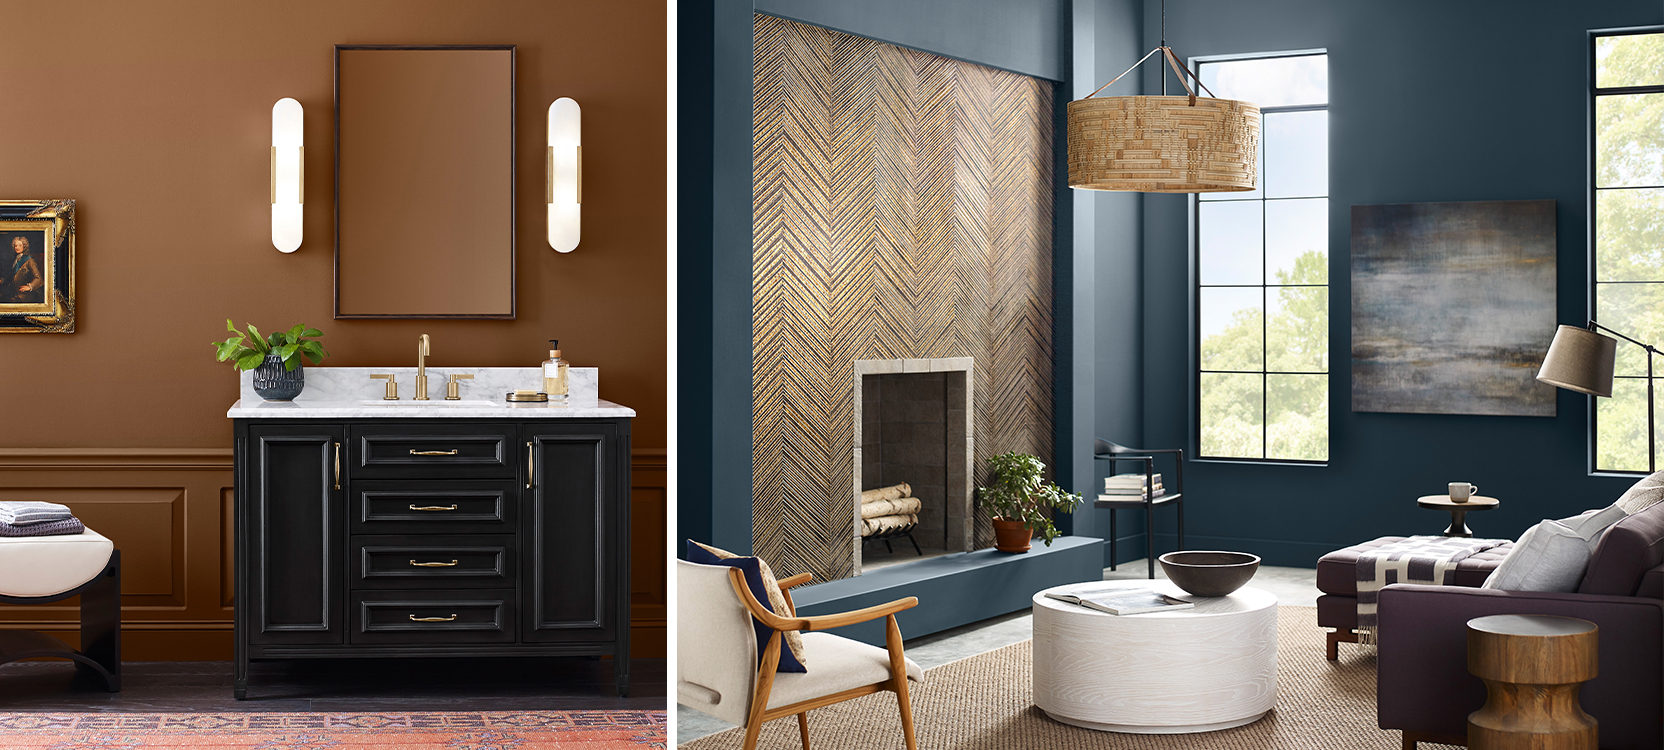 First image: Bathroom vanity with black cabinet, white marble countertop, gold details and modern oblong vertical lights in front of light brown wall with wainscoting. Second image: Living room with deep blue walls, statement fireplace focal point, tall windows and modern traditional style decor. 